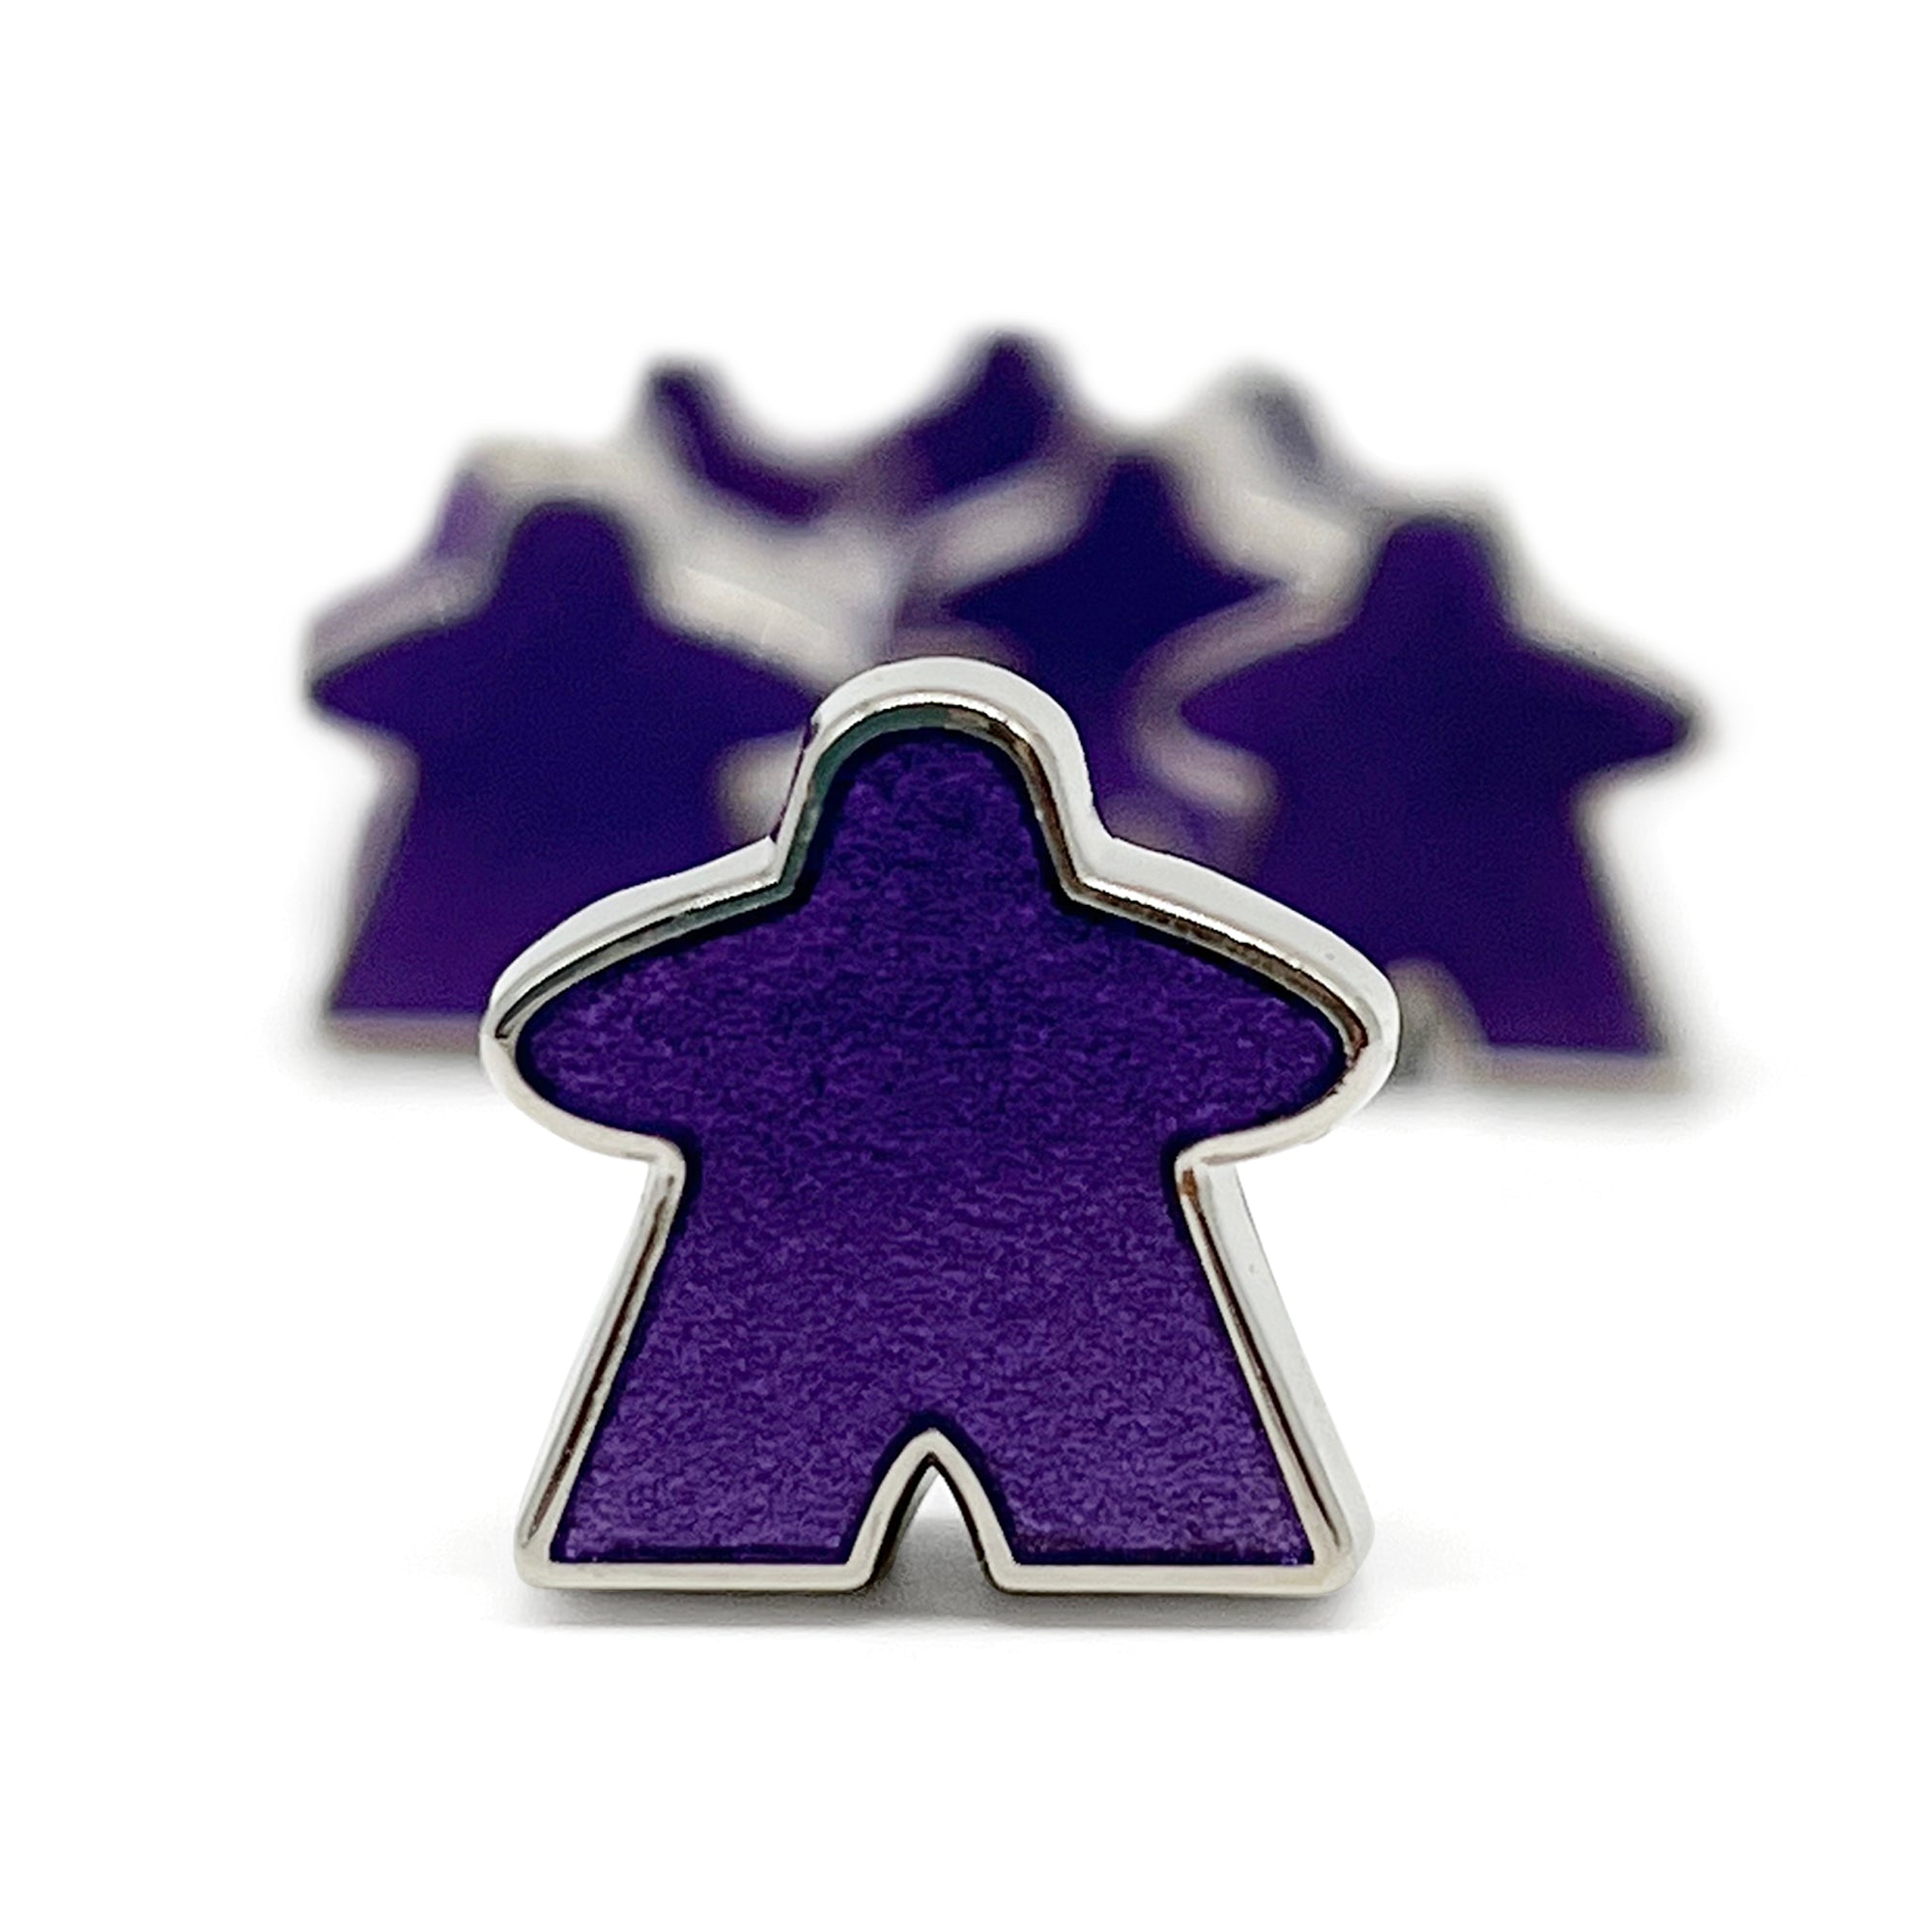 8 Pack of Purple Enamel Meeples by Norse Foundry - NOR 03476